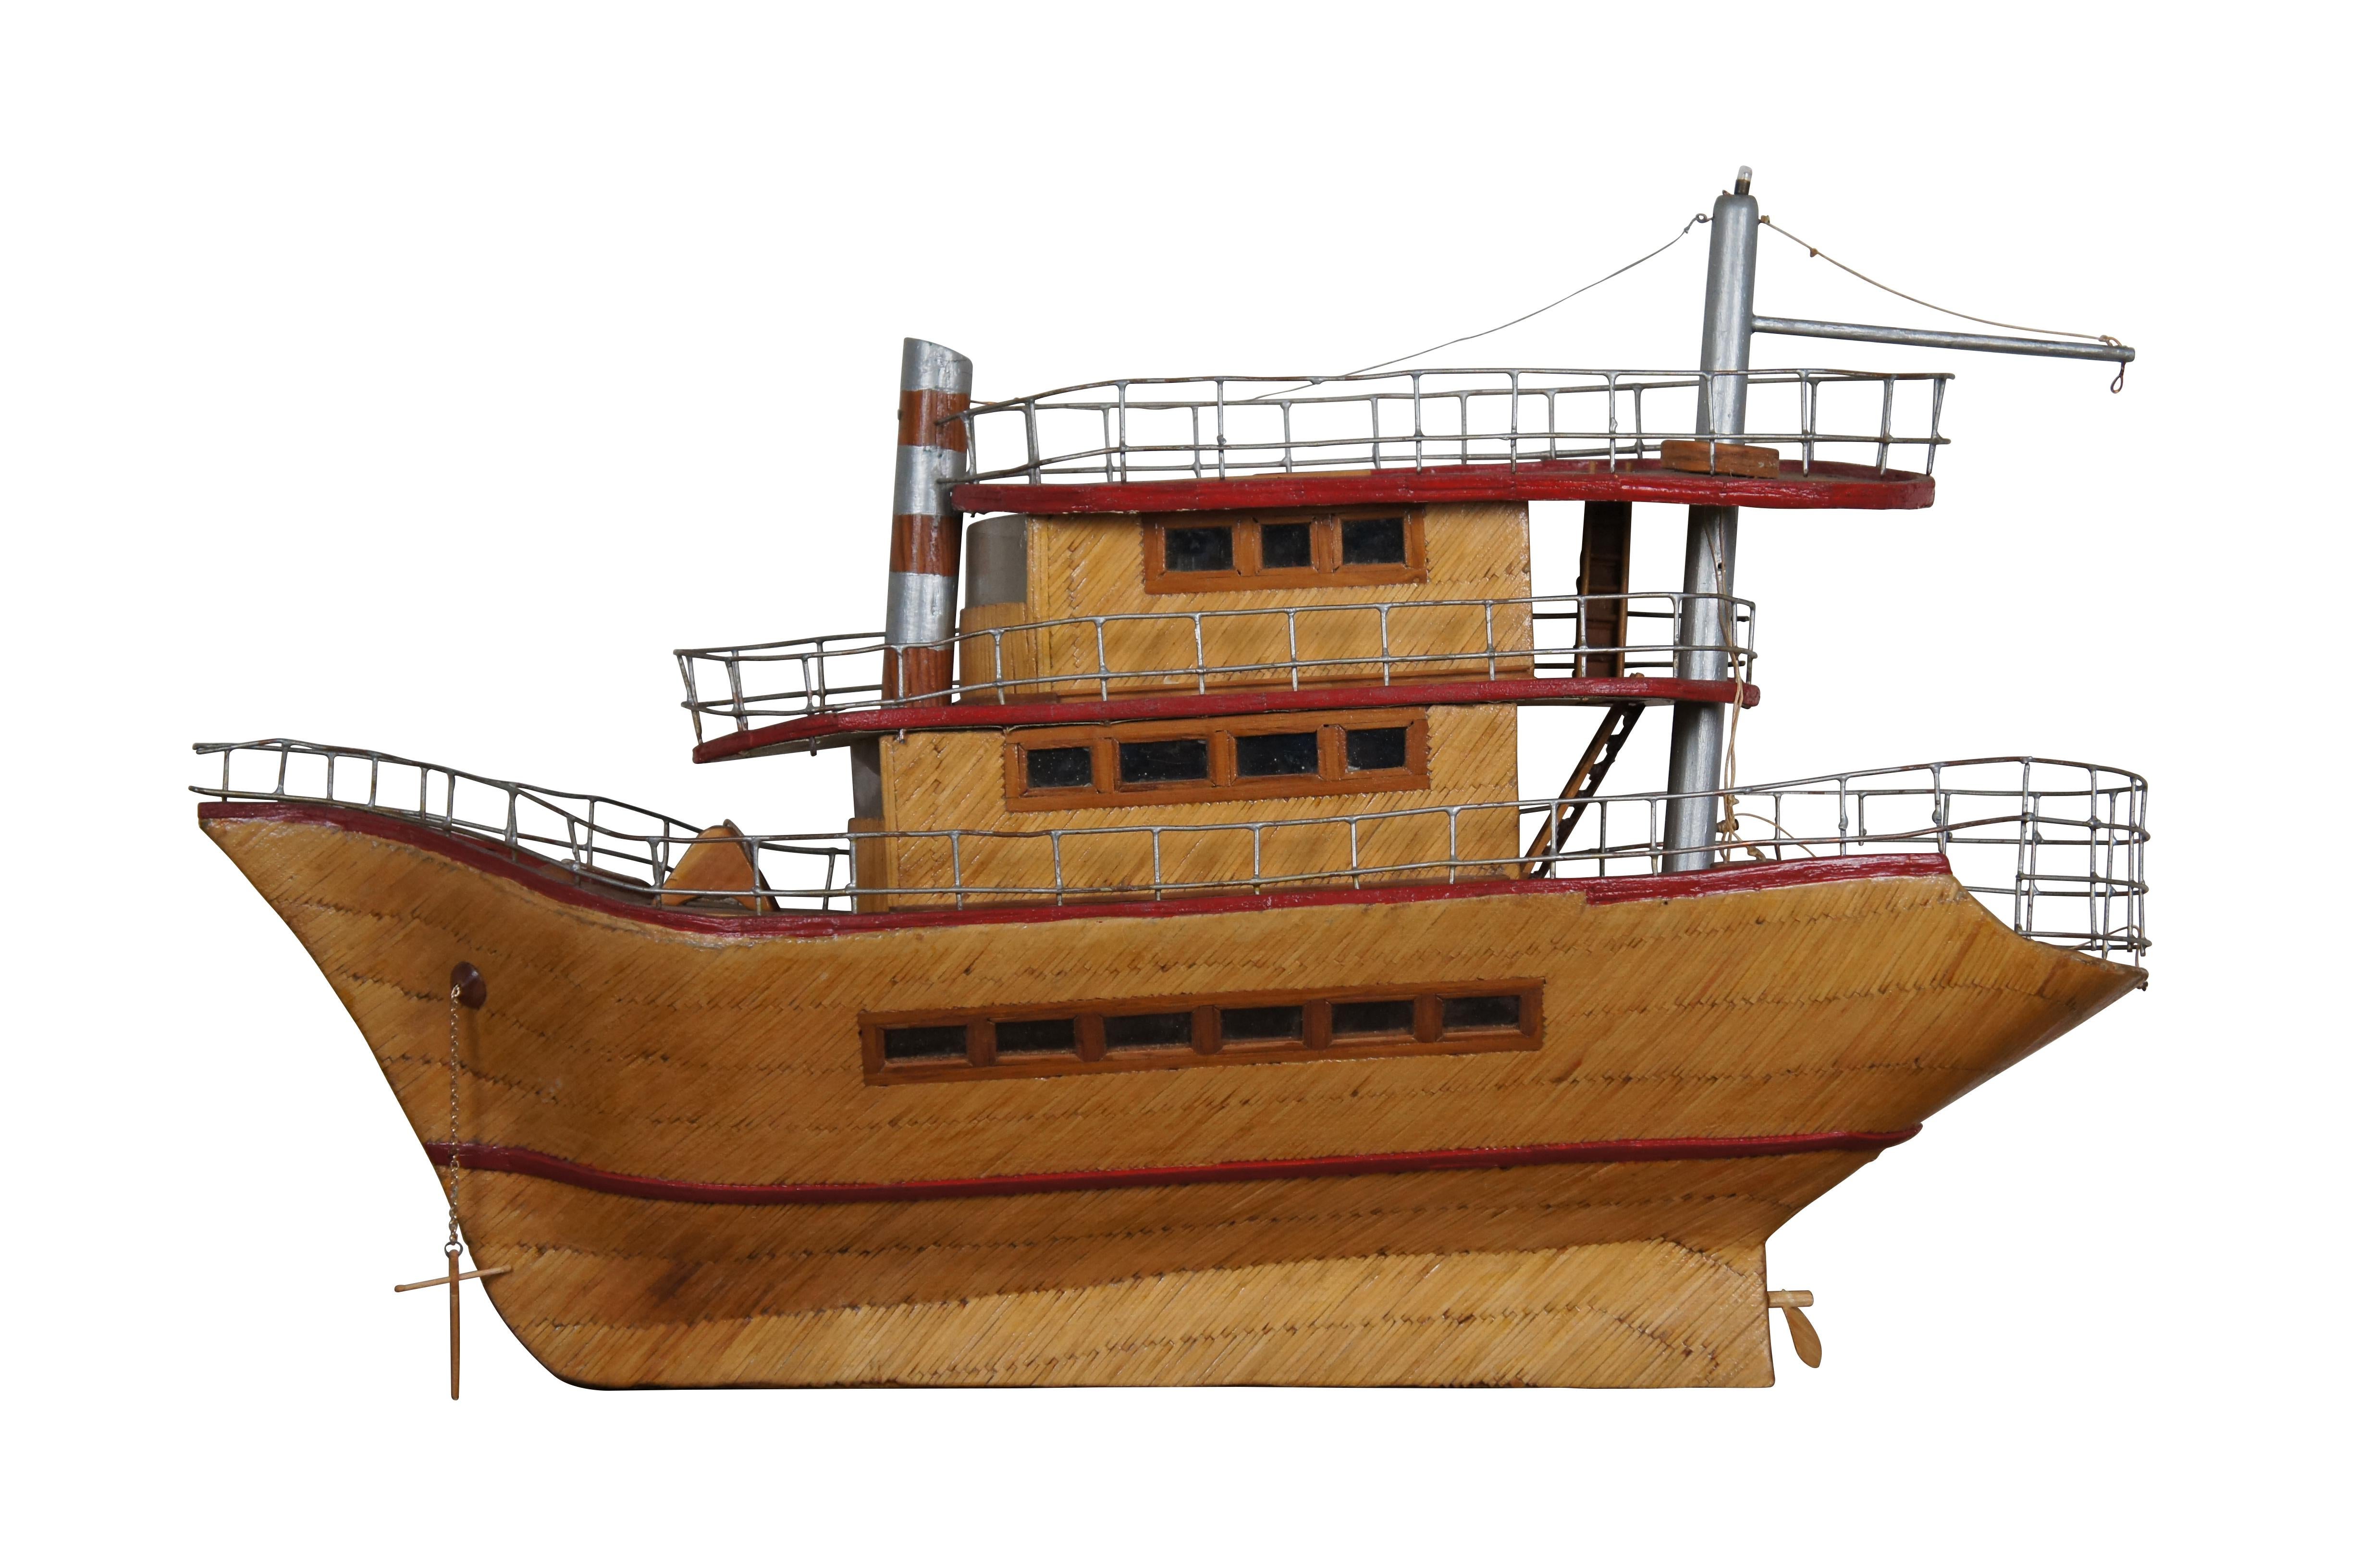 Mid century three tiered prison folk art / tramp art model steam boat sculpture. Upcycled cardboard framing structure, matchstick exterior with glossy finish, red trim, soldered wire railings, plastic windows. interior cabin spaces and hold are